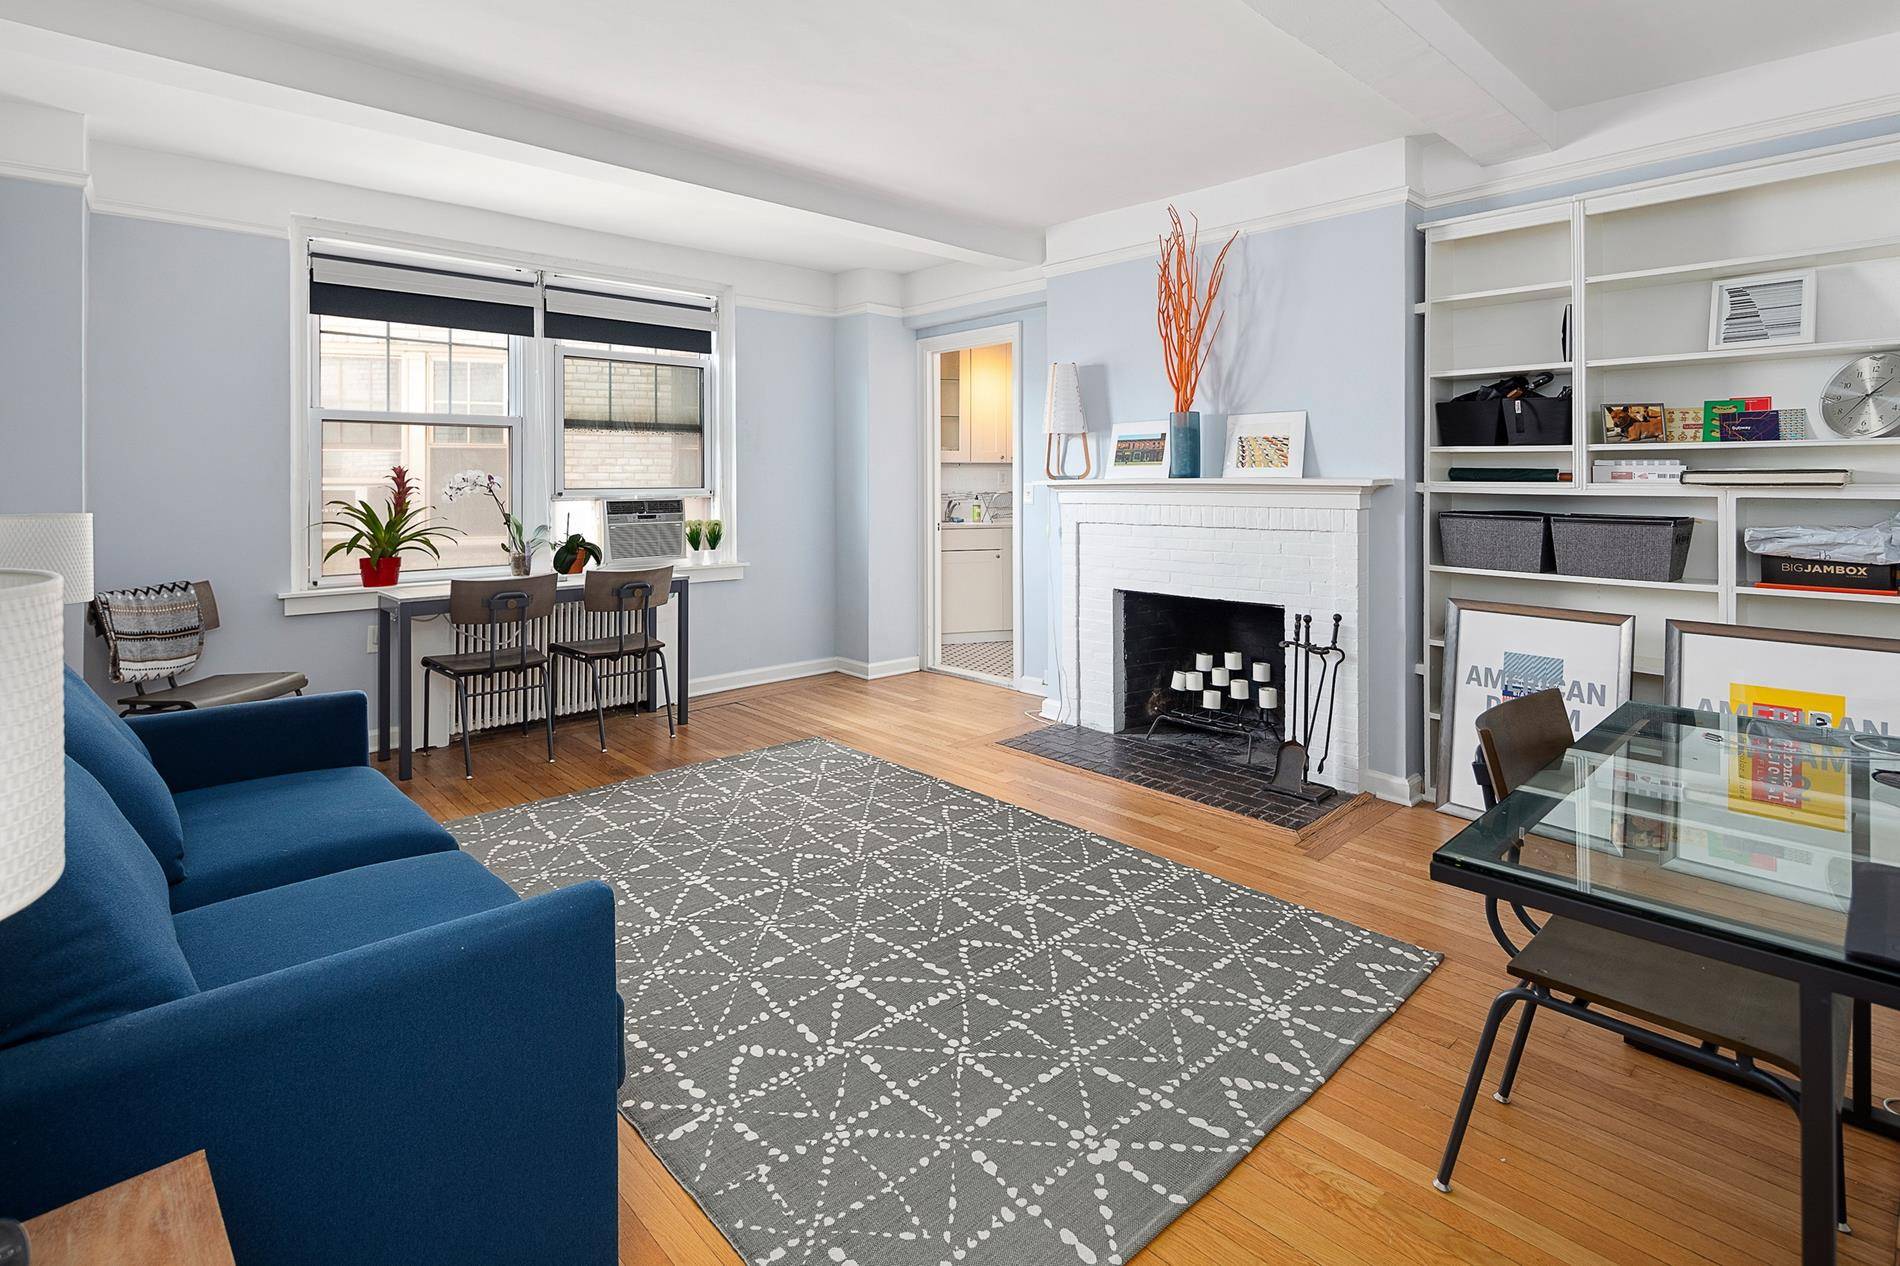 This beautiful, move in ready studio in the West Village has retained the prewar charm expected of a Bing amp ; Bing apartment, with beamed ceilings, hardwood floors, restored molding ...